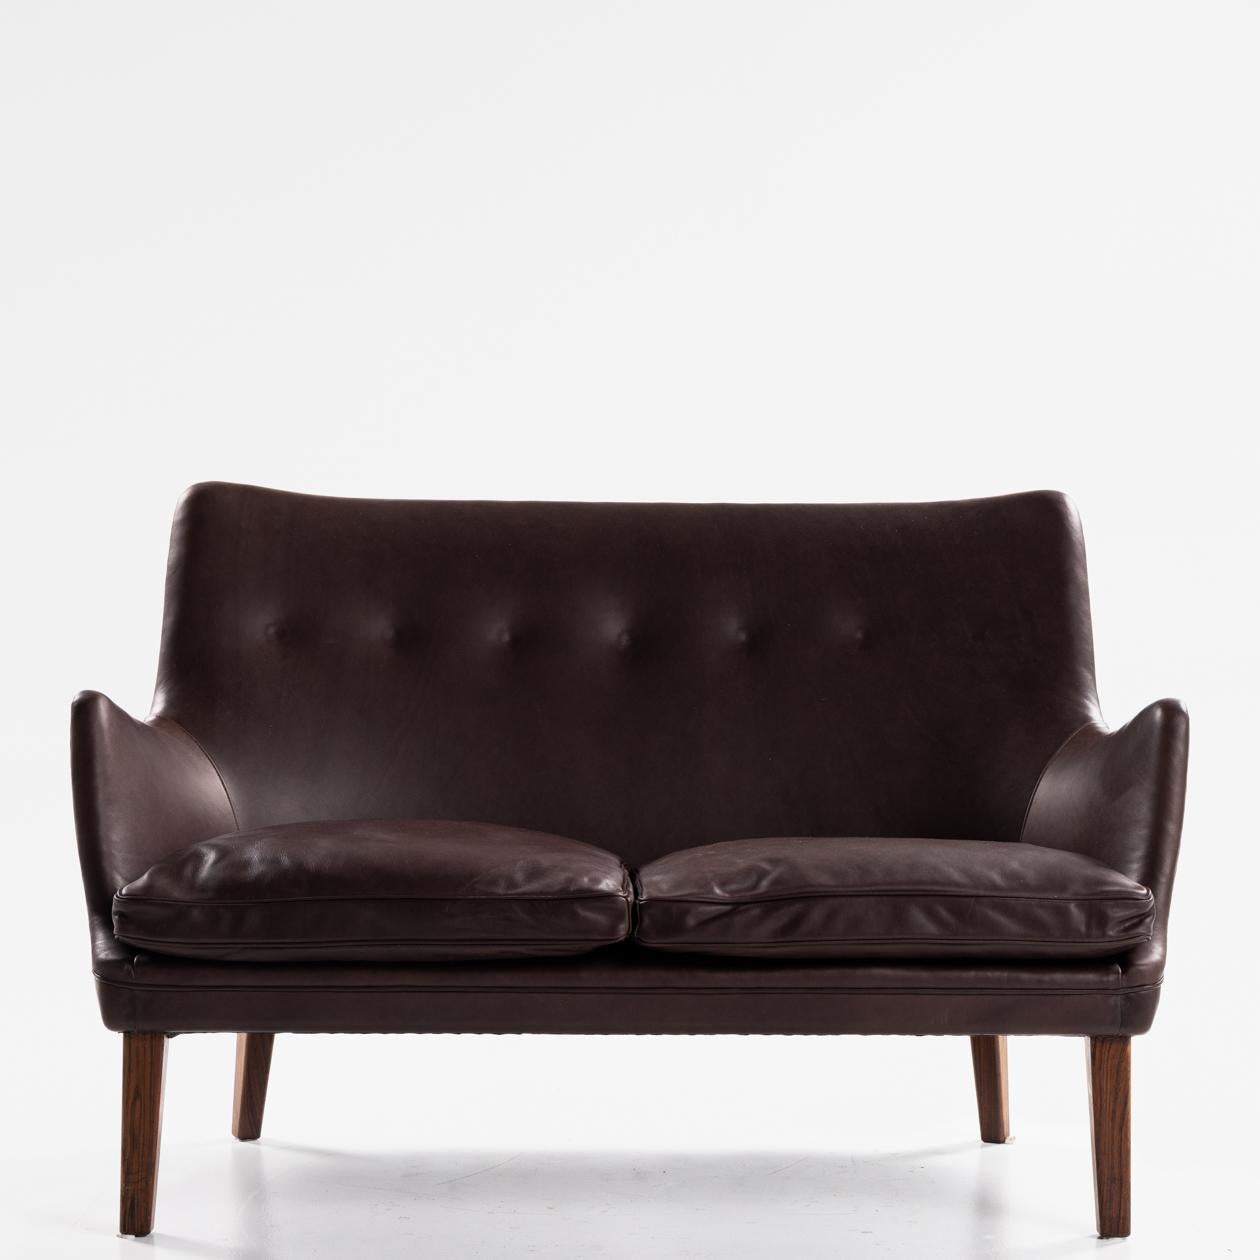 AV 53/2 - 2-seater sofa in new aniline leather (Victoria, colour: Ebony) with legs in solid Brazilian rosewood. Arne Vodder / Ivan Schlechter.